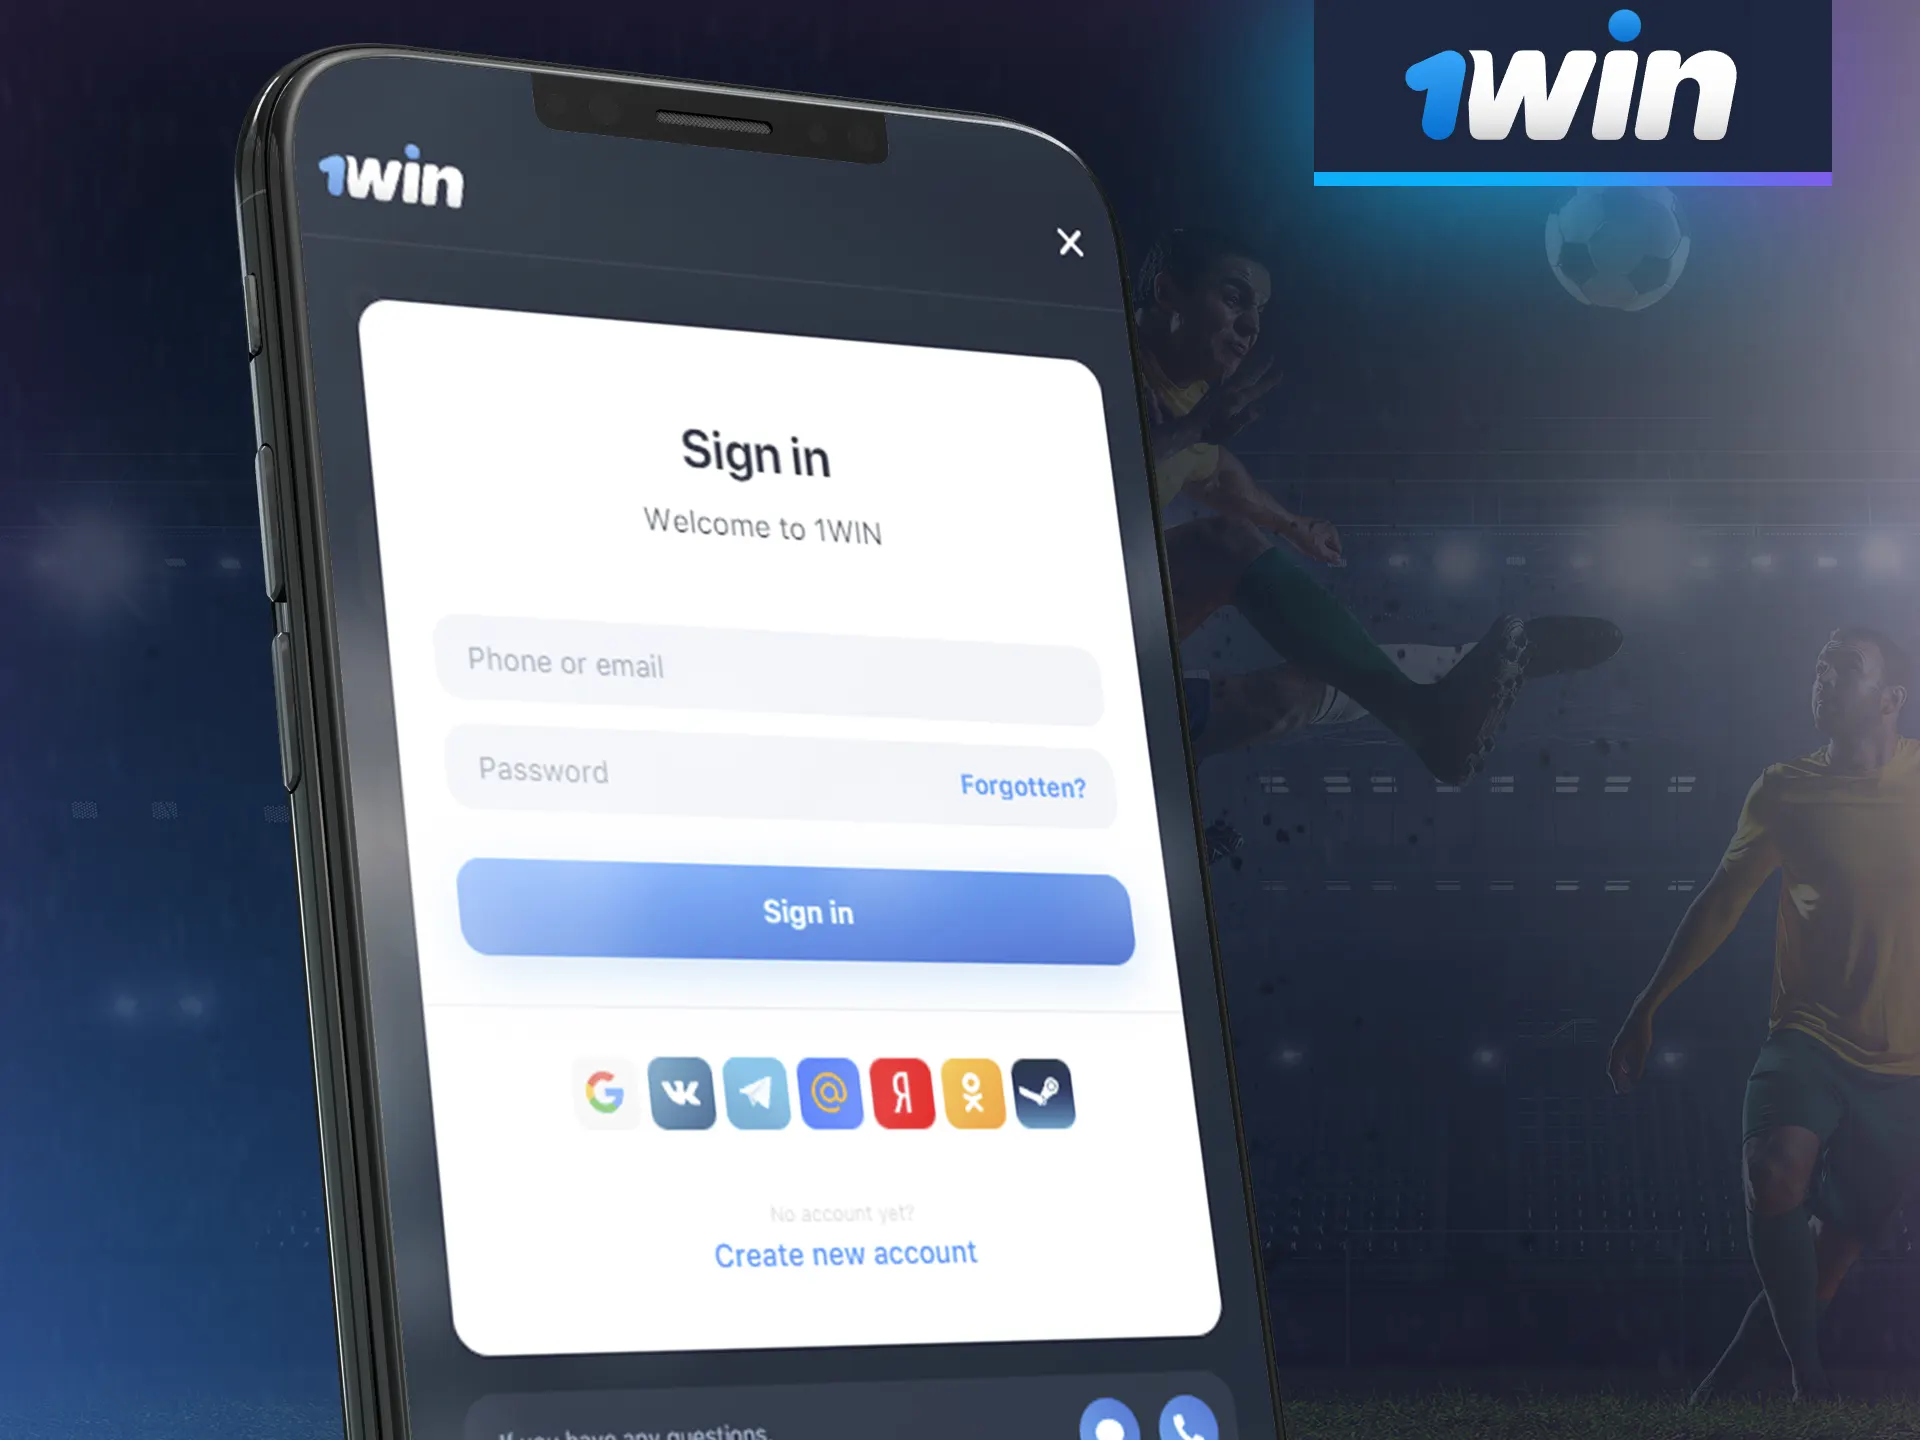 Log in to your 1Win app account.